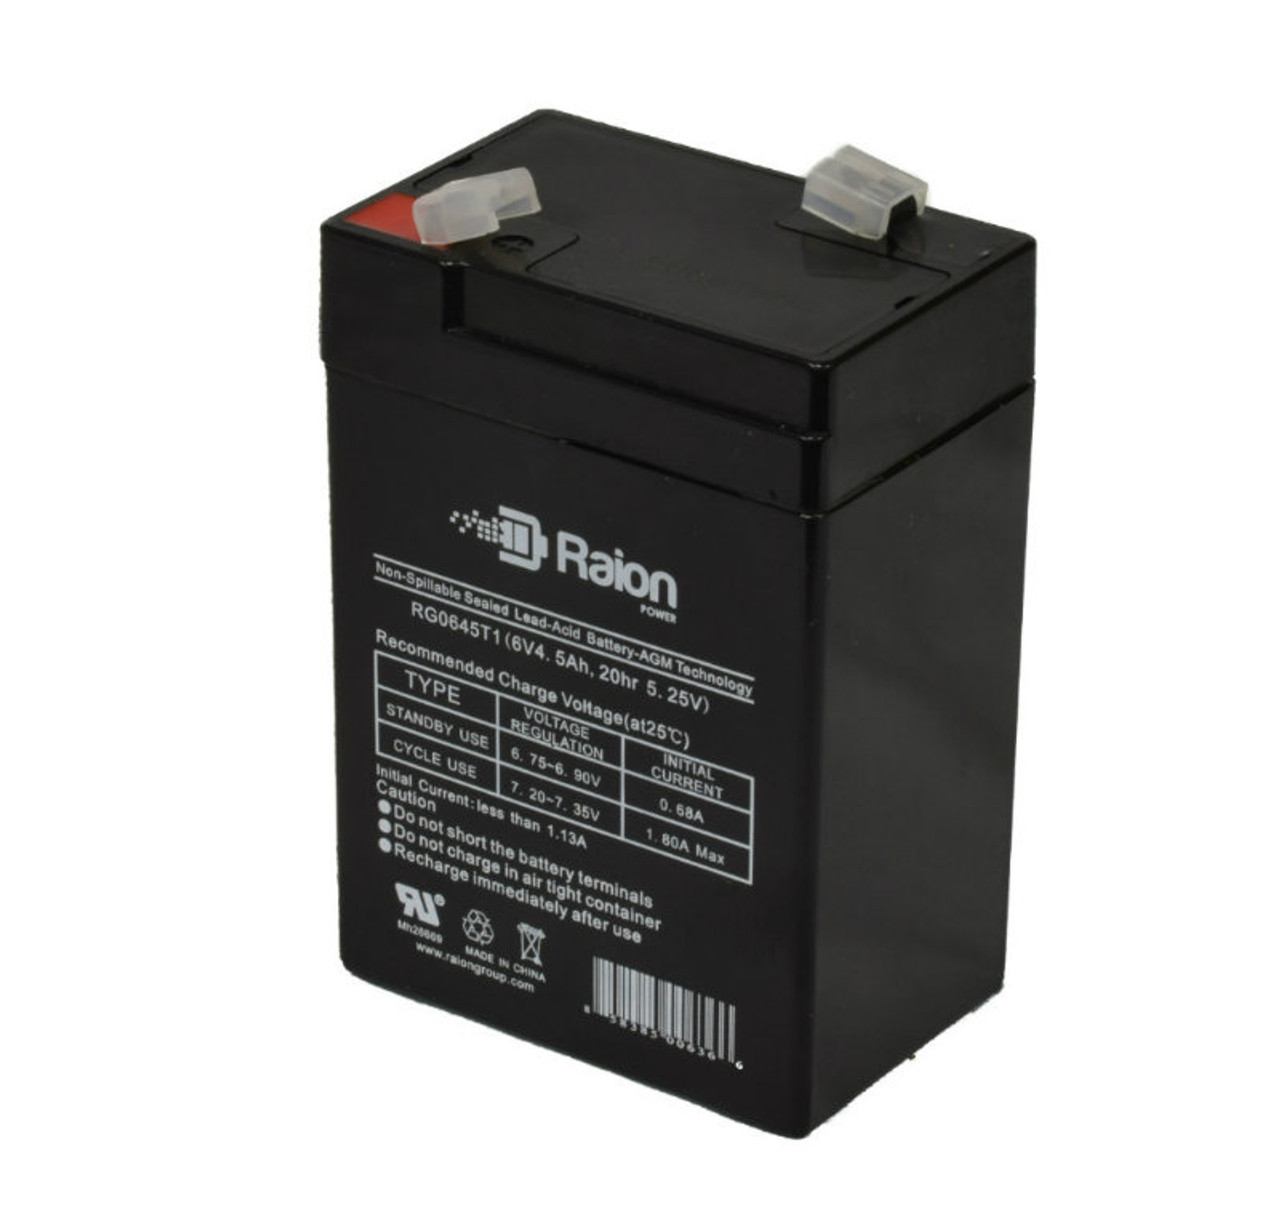 Raion Power RG0645T1 6V 4.5Ah Replacement Battery Cartridge for Lithonia FAP